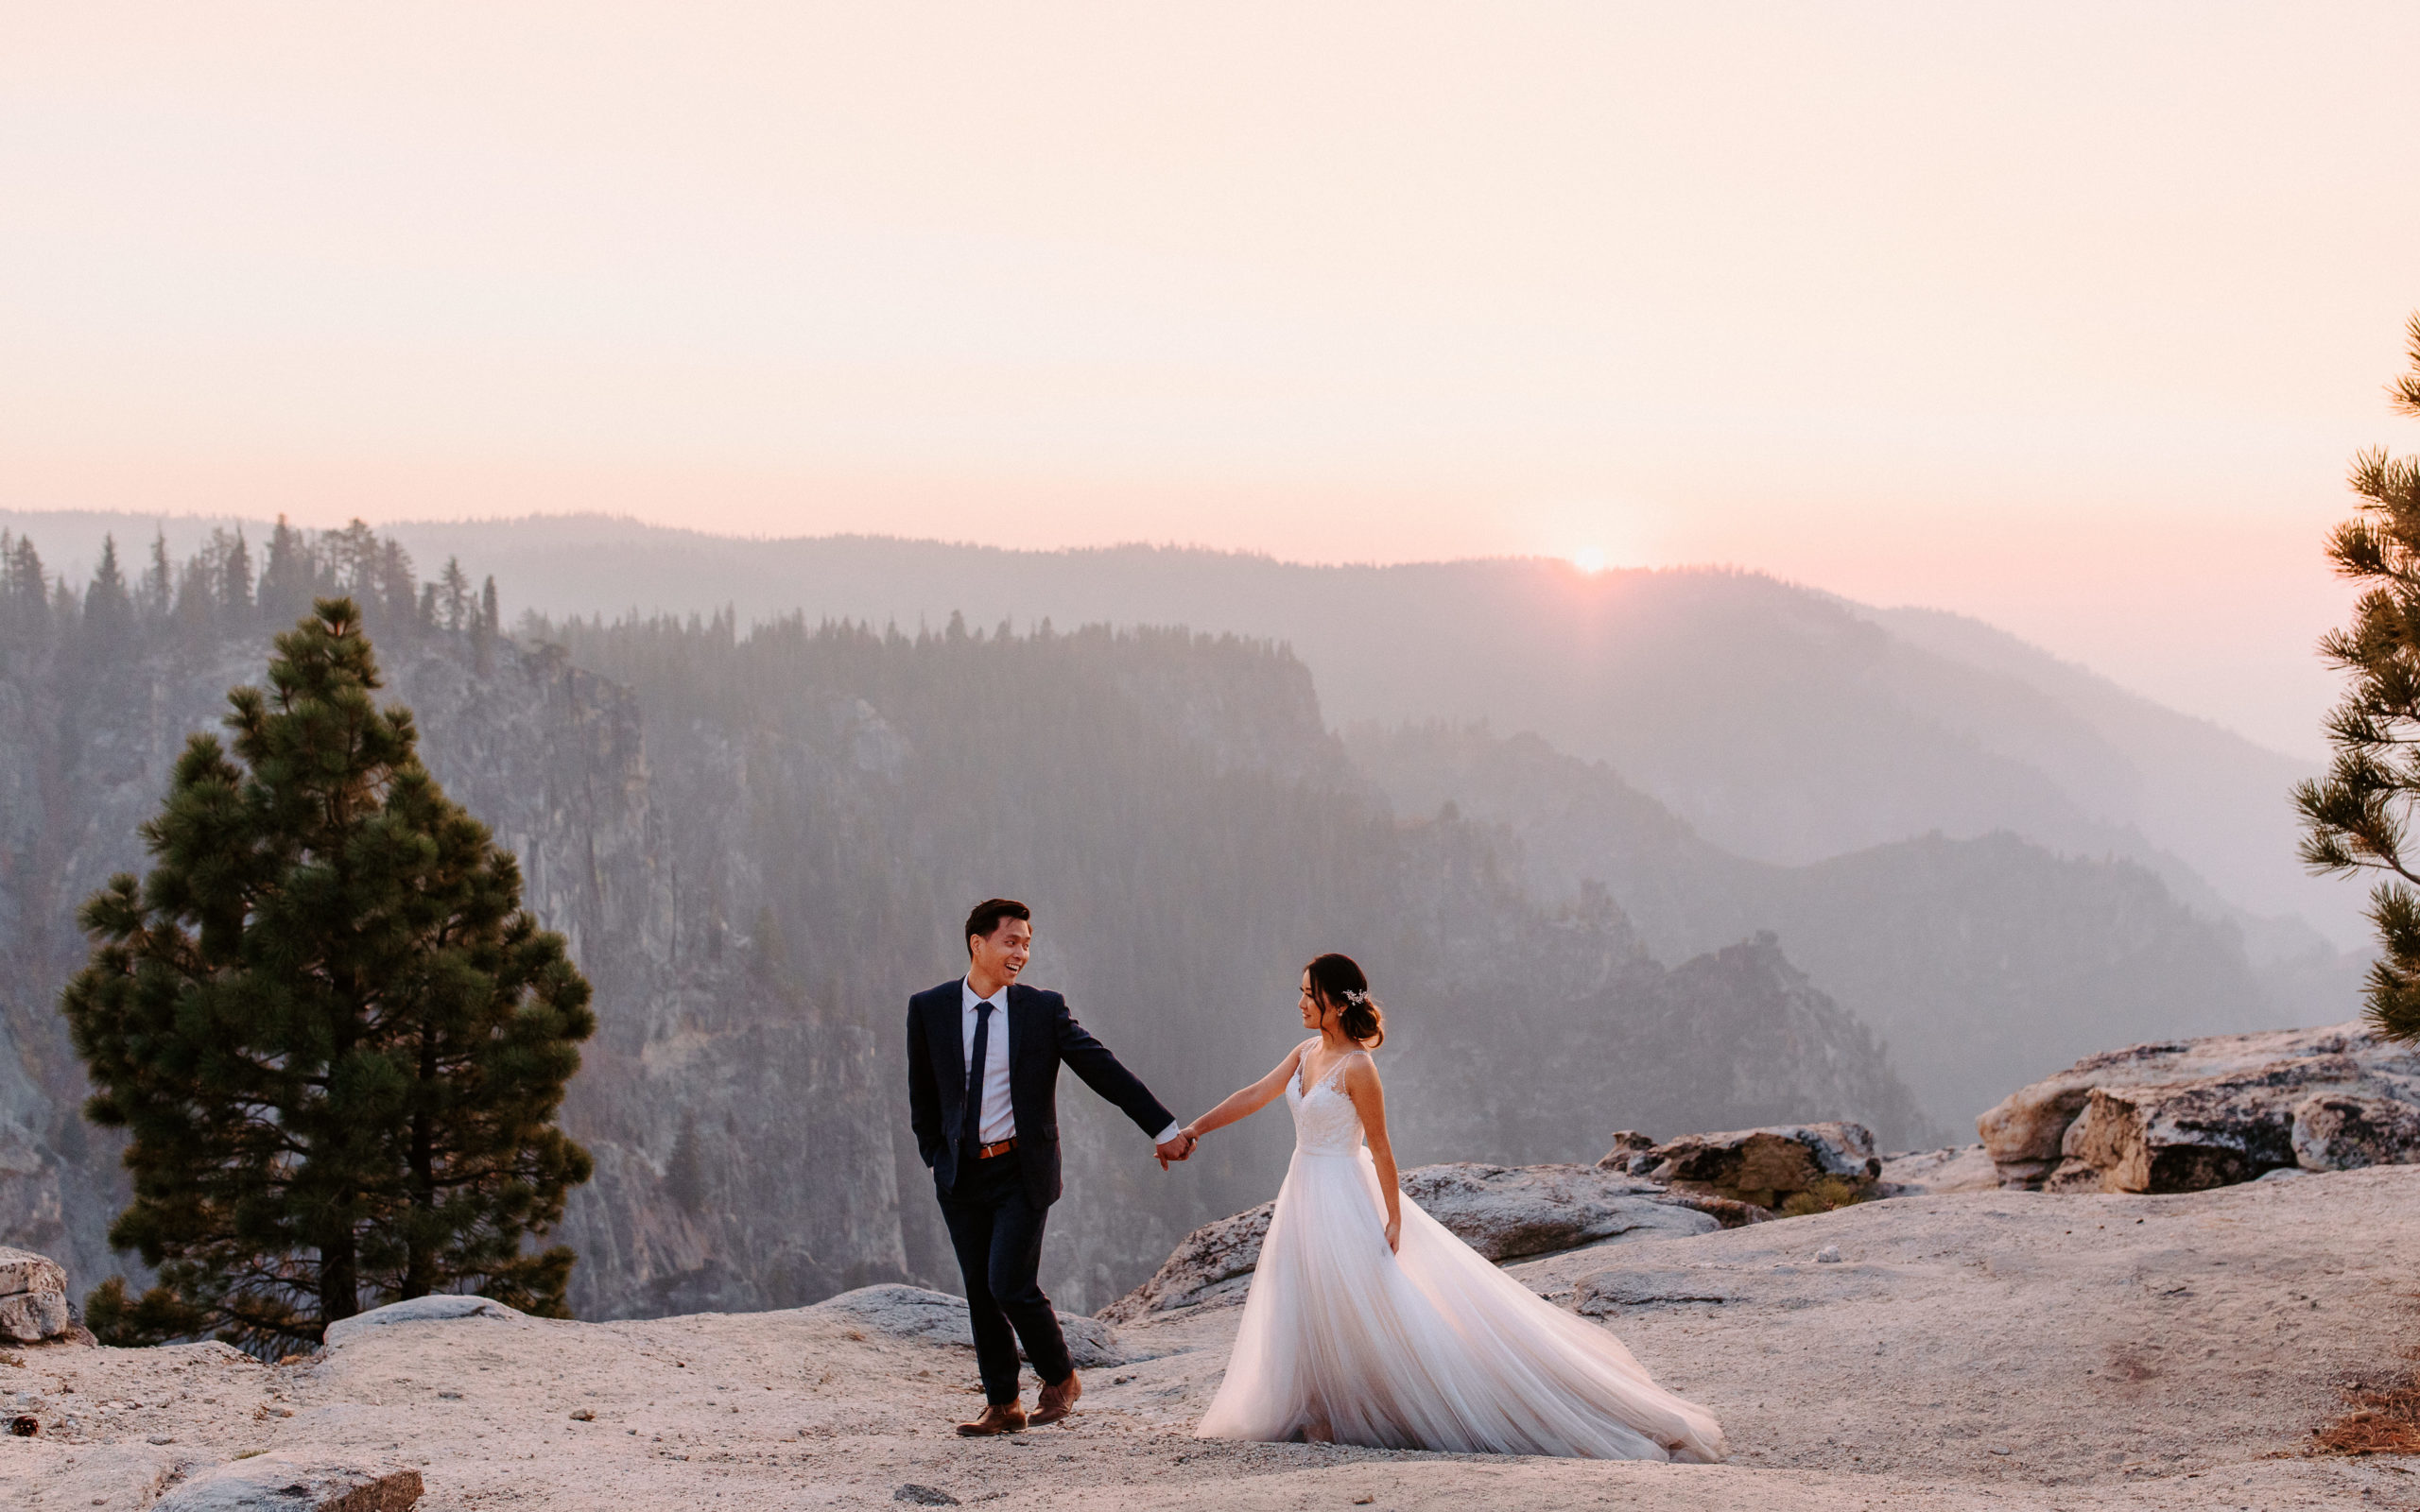 groom and bride looking at sunset, Taft Point elopement, Yosemite Elopement, Glacier Point Elopement, best places to elope in california, northern california elopement, Rachel Christopherson Photography